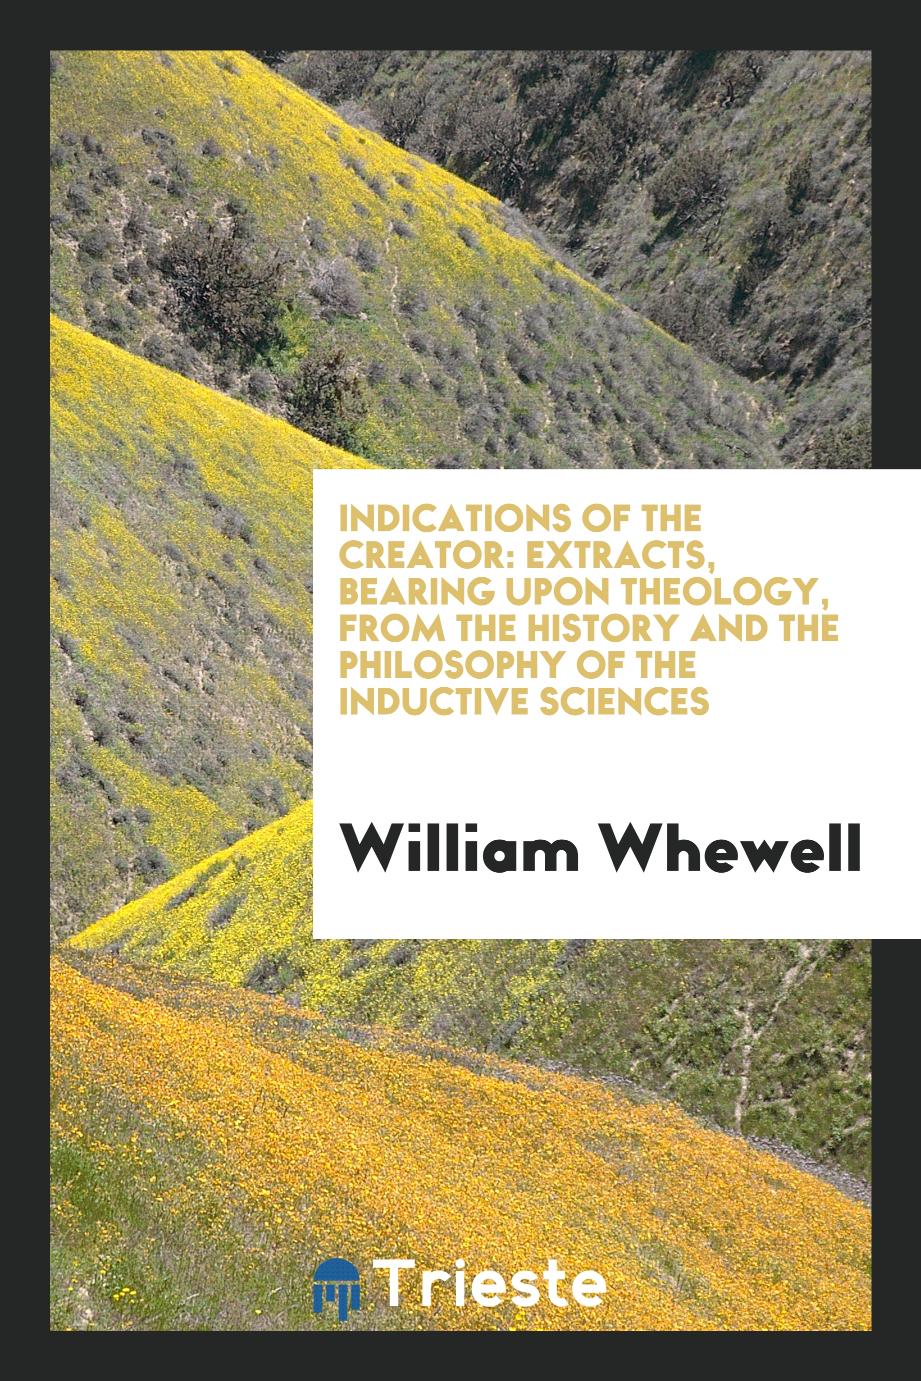 Indications of the Creator: Extracts, Bearing Upon Theology, from The History and The Philosophy of the Inductive Sciences